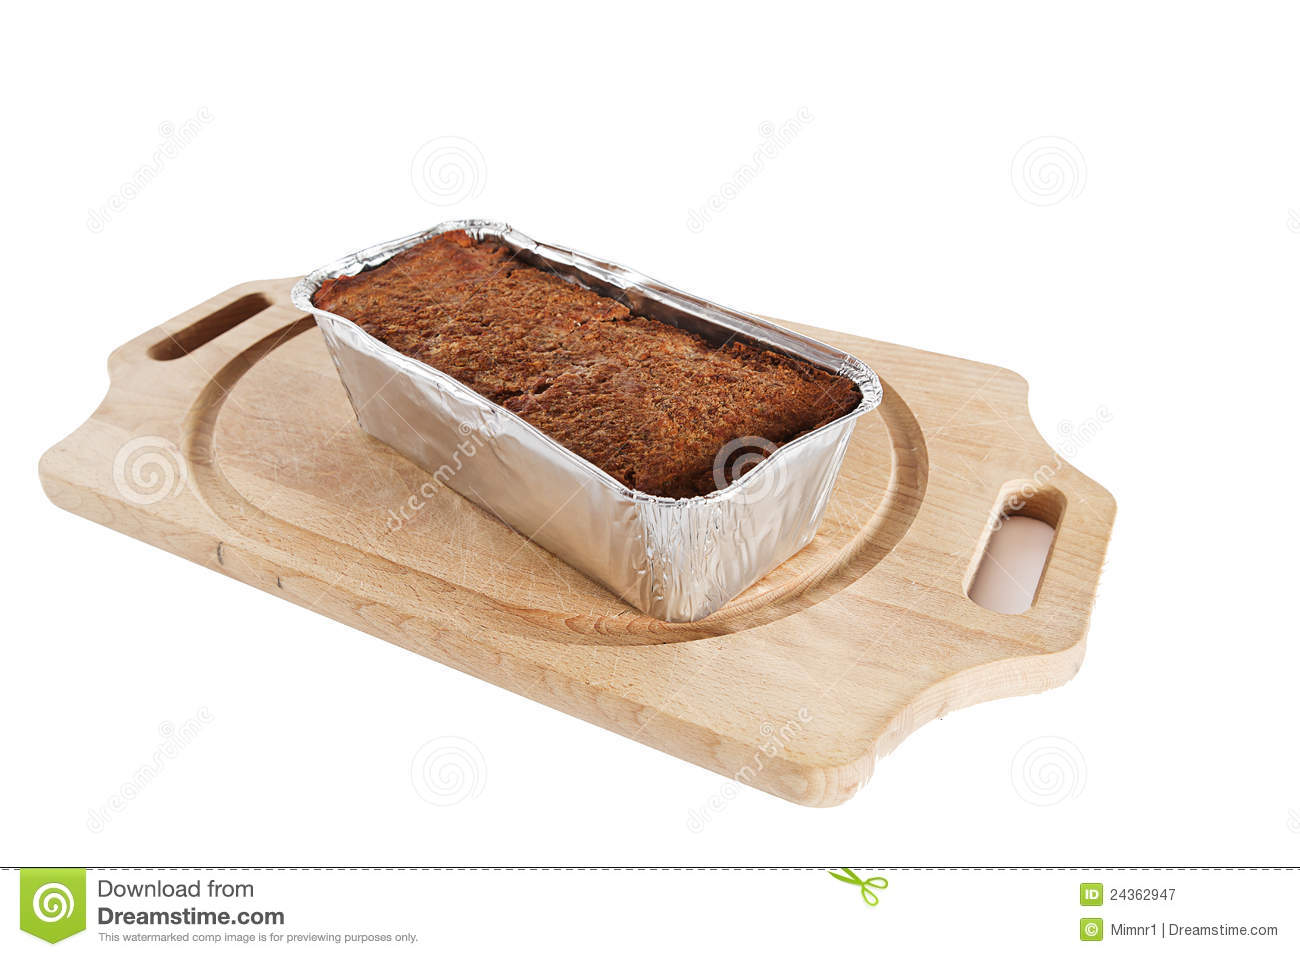 Meat Loaf In Baking Tray Royalty Free Stock Photography   Image    